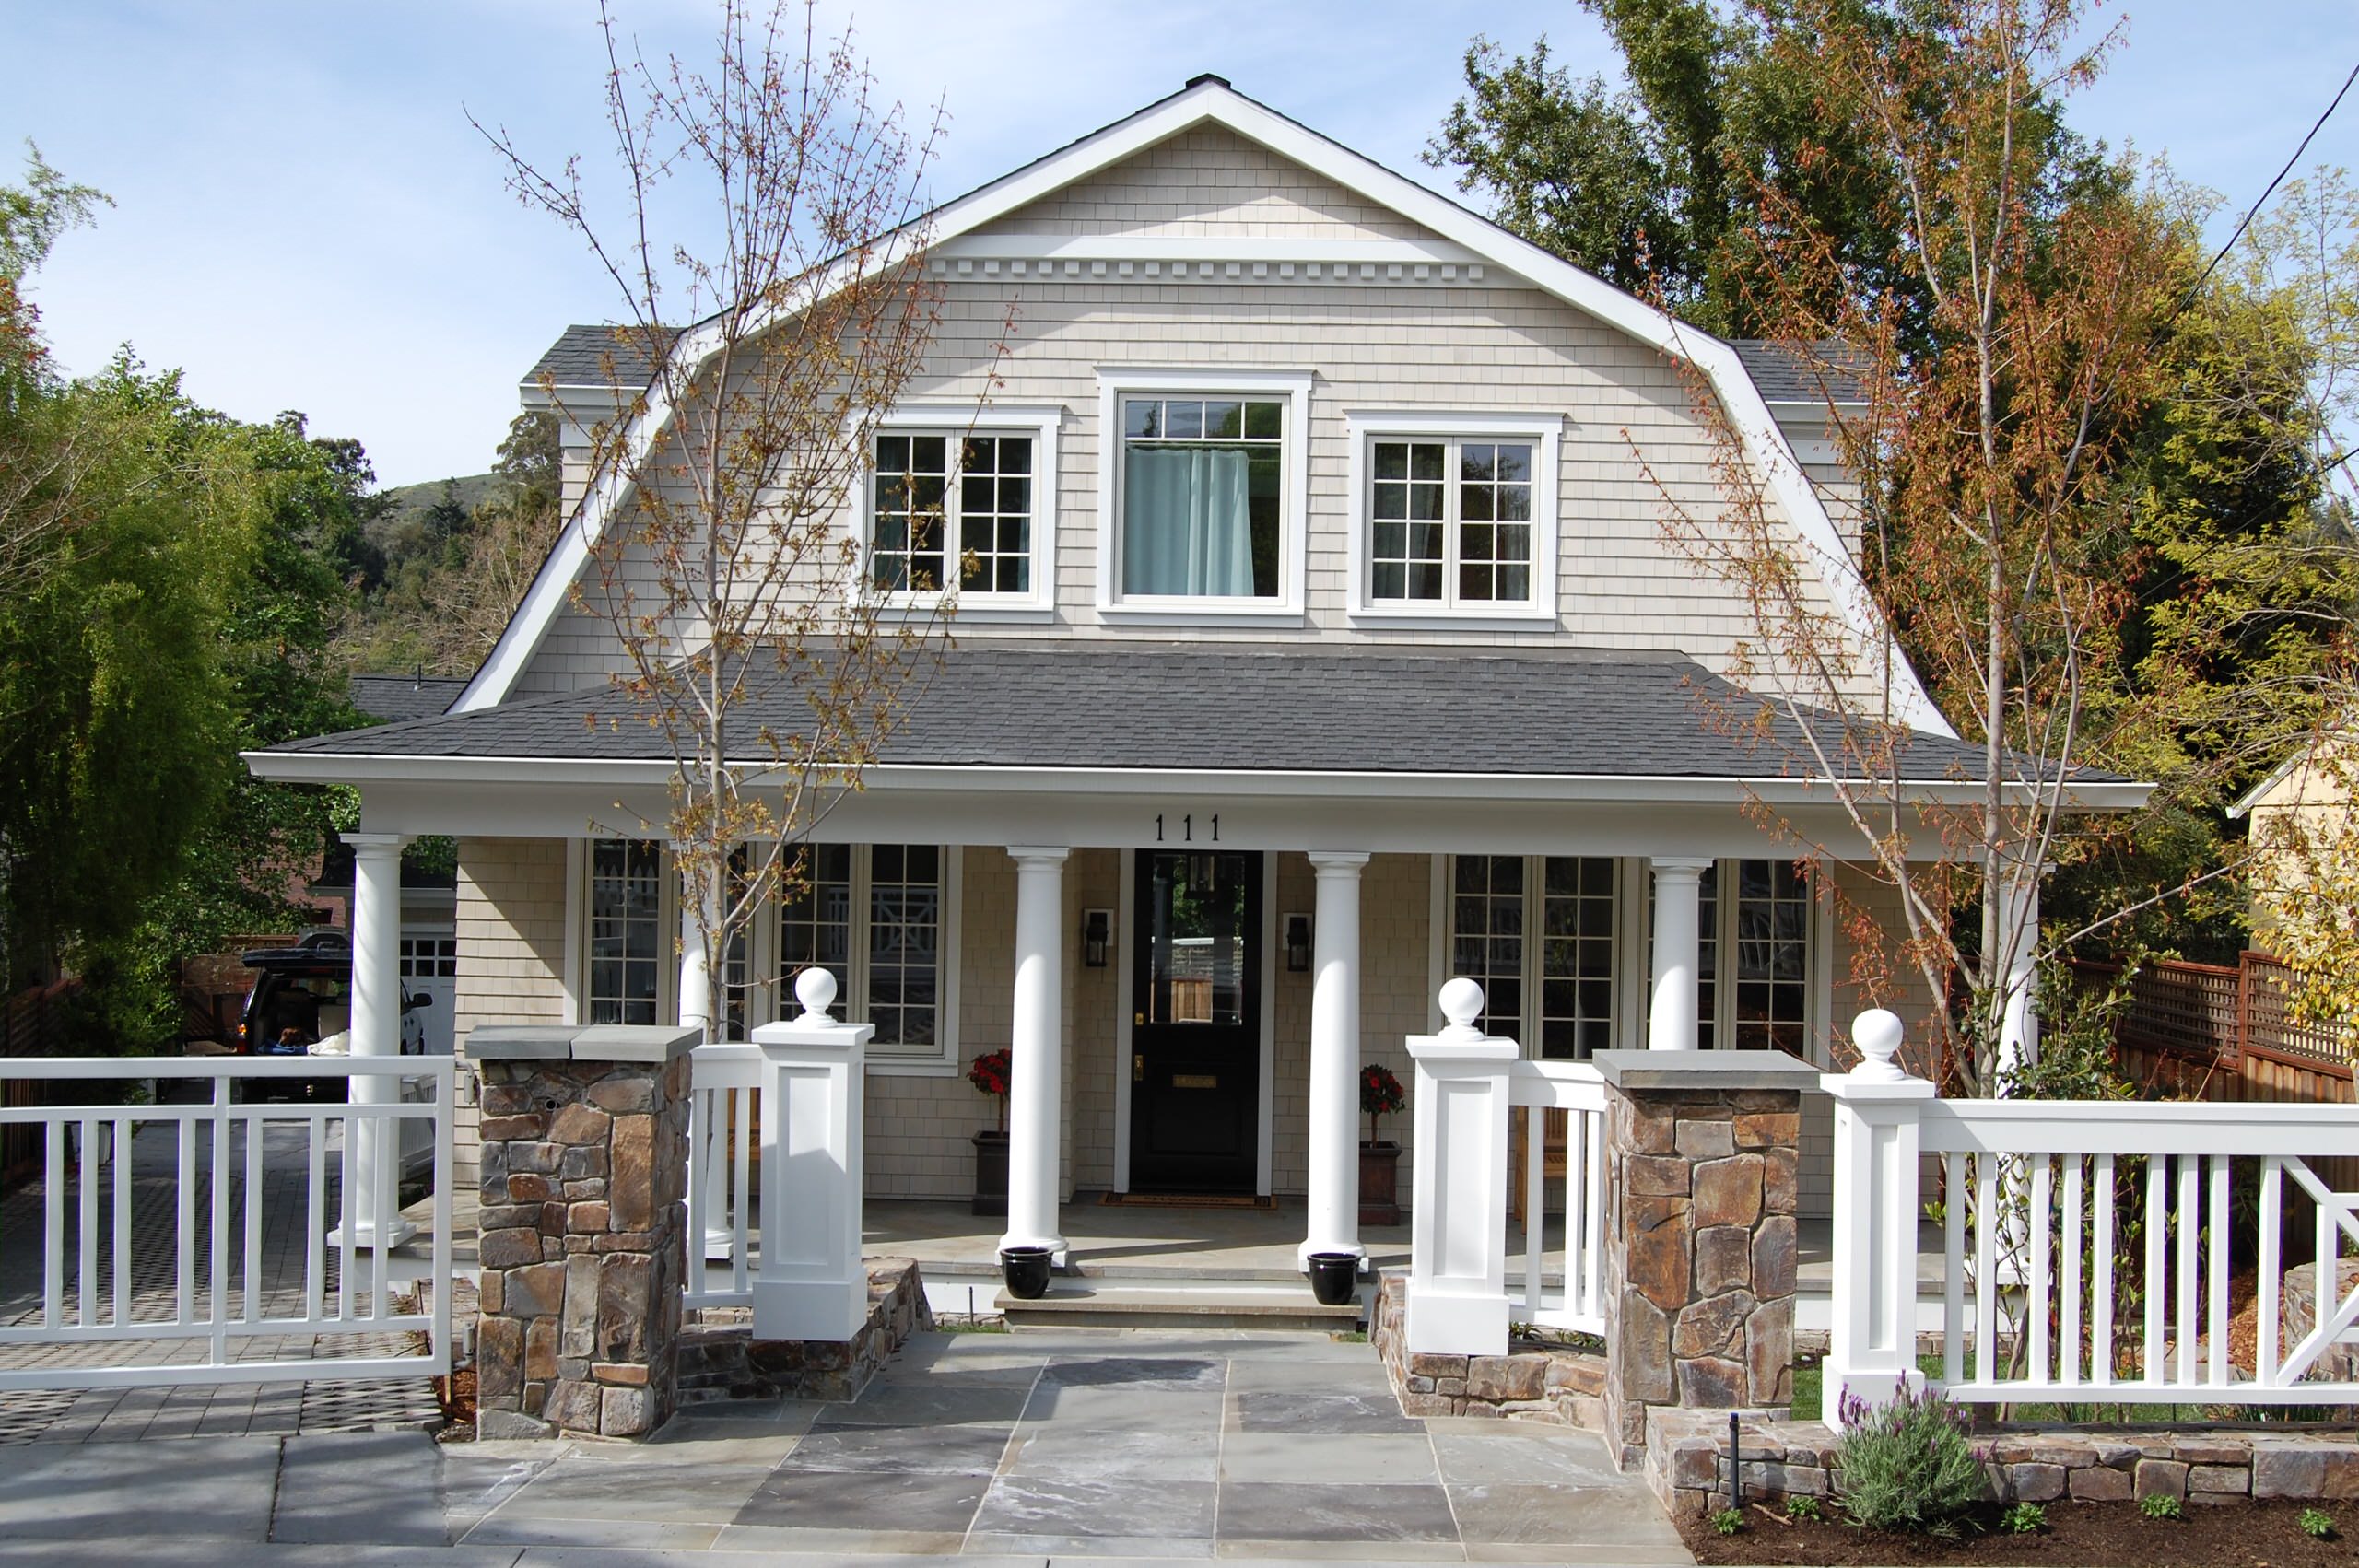 Sycamore Park Gambrel Roof Shingle Style